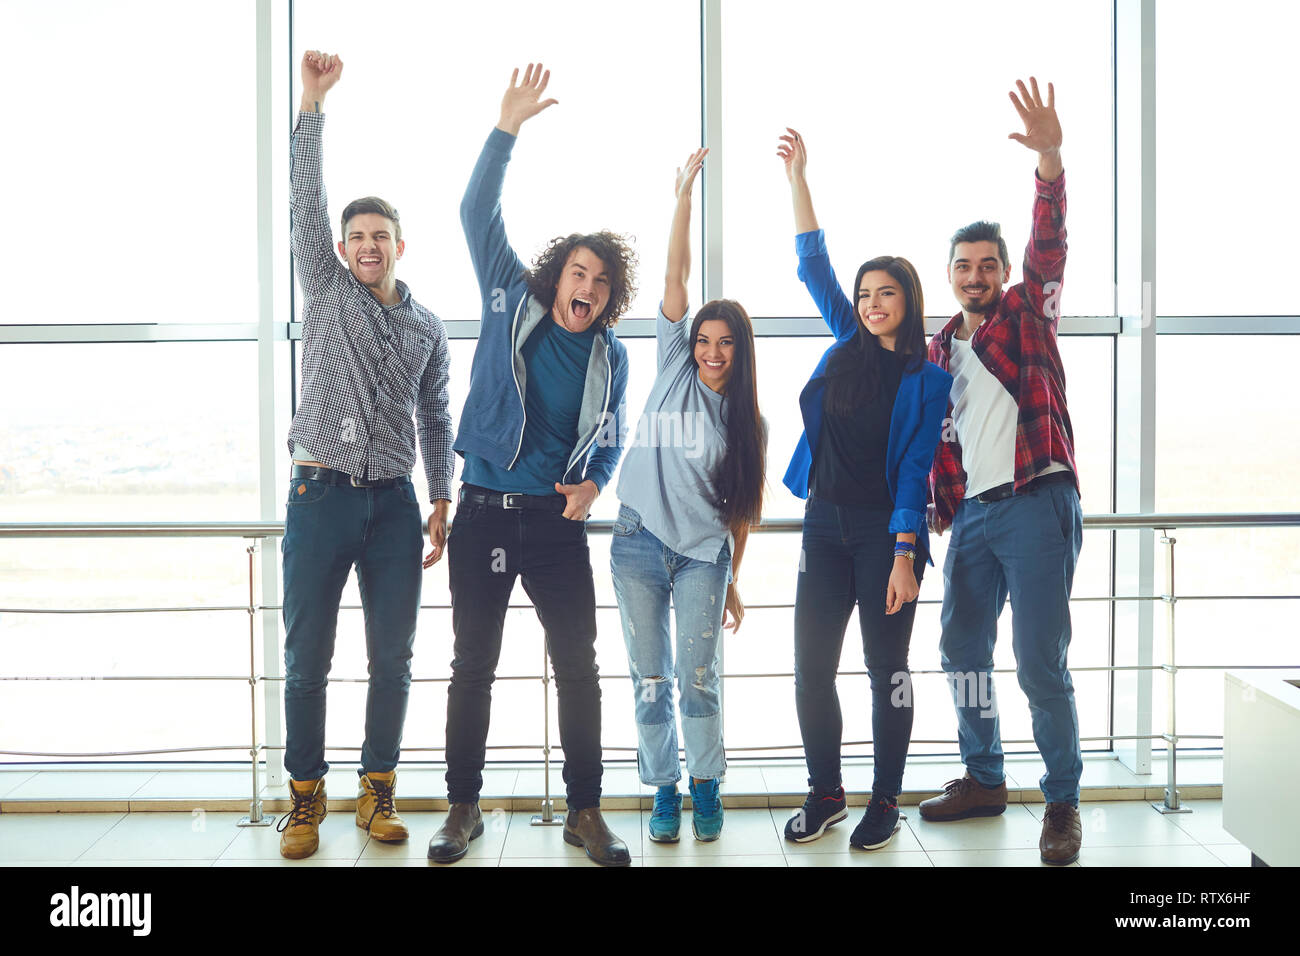 Young people raised hands up against the window Stock Photo